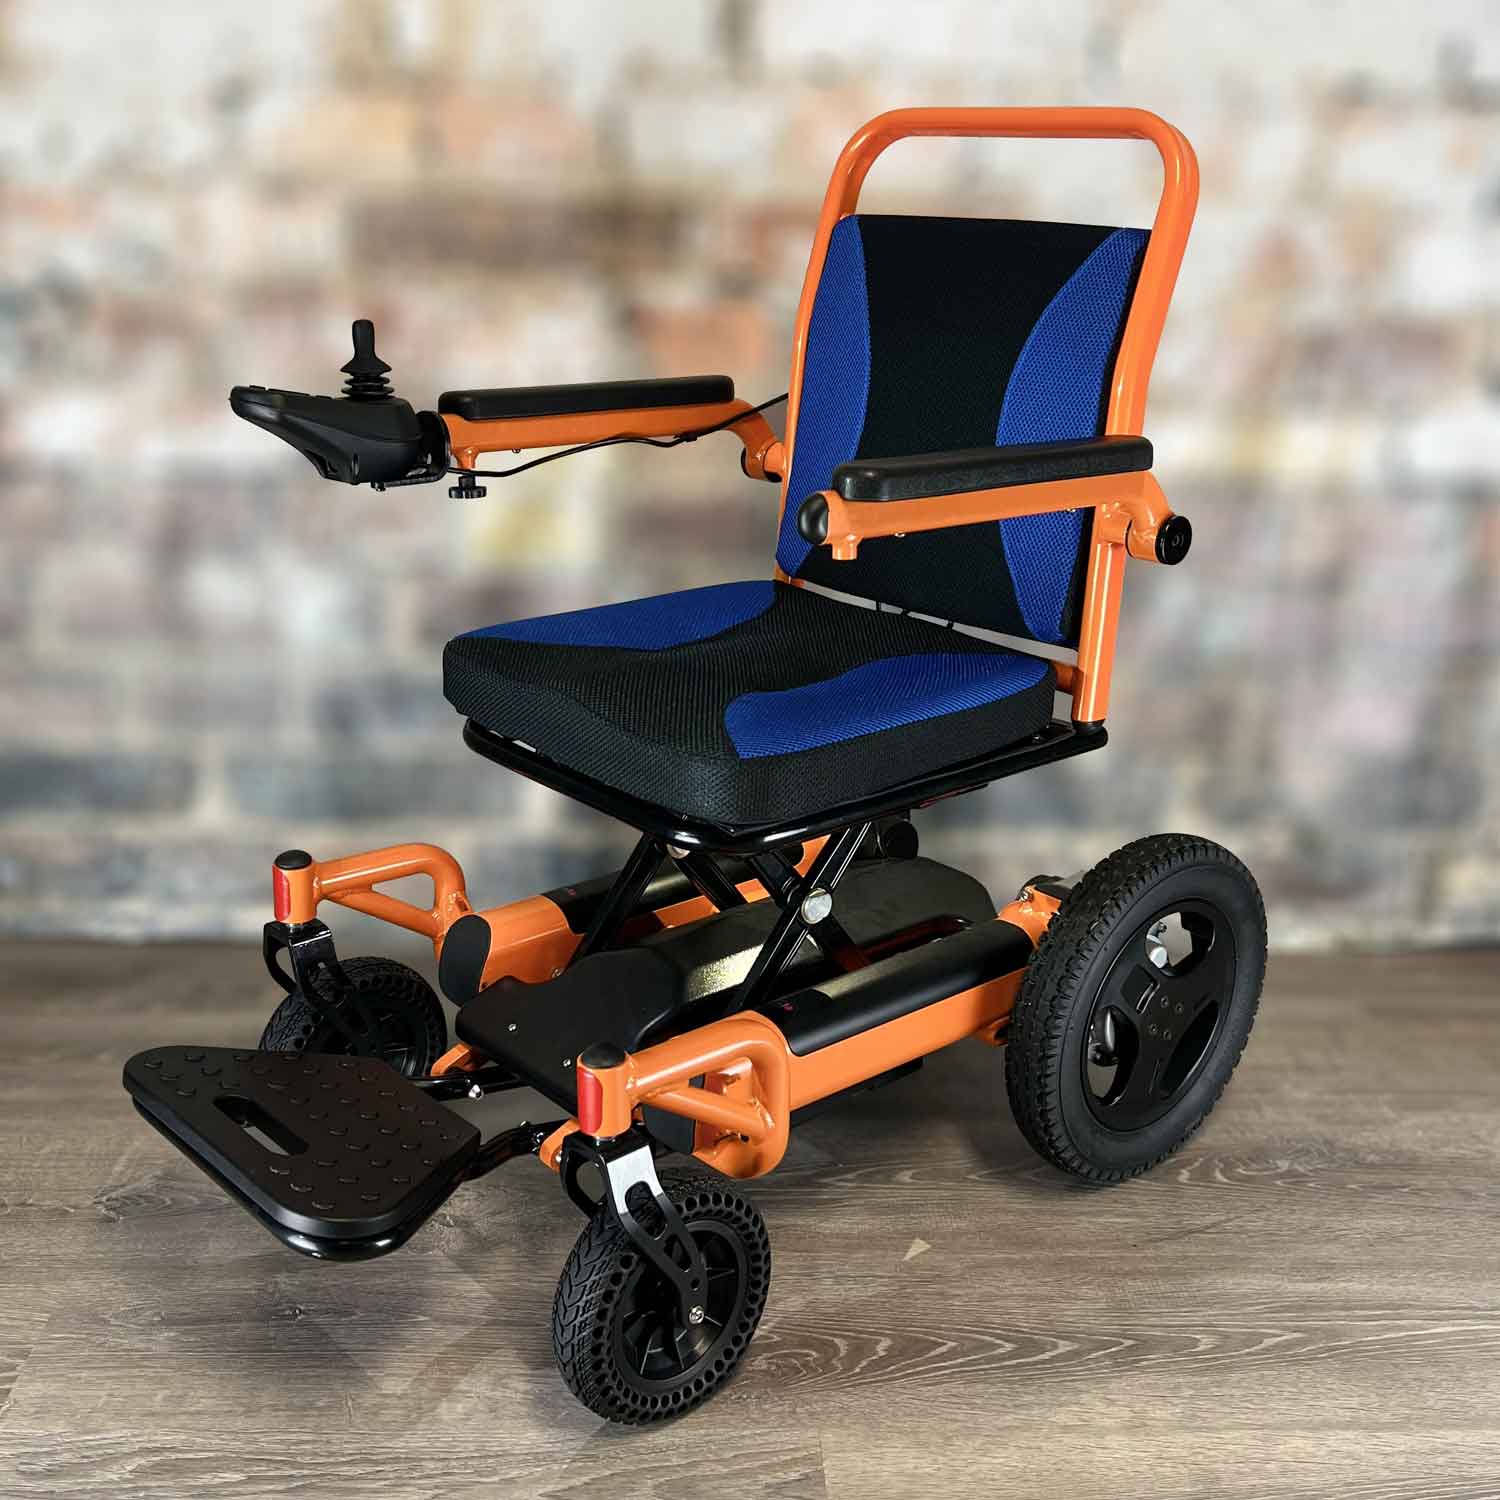 Electric Wheelchairs, Power Wheelchairs